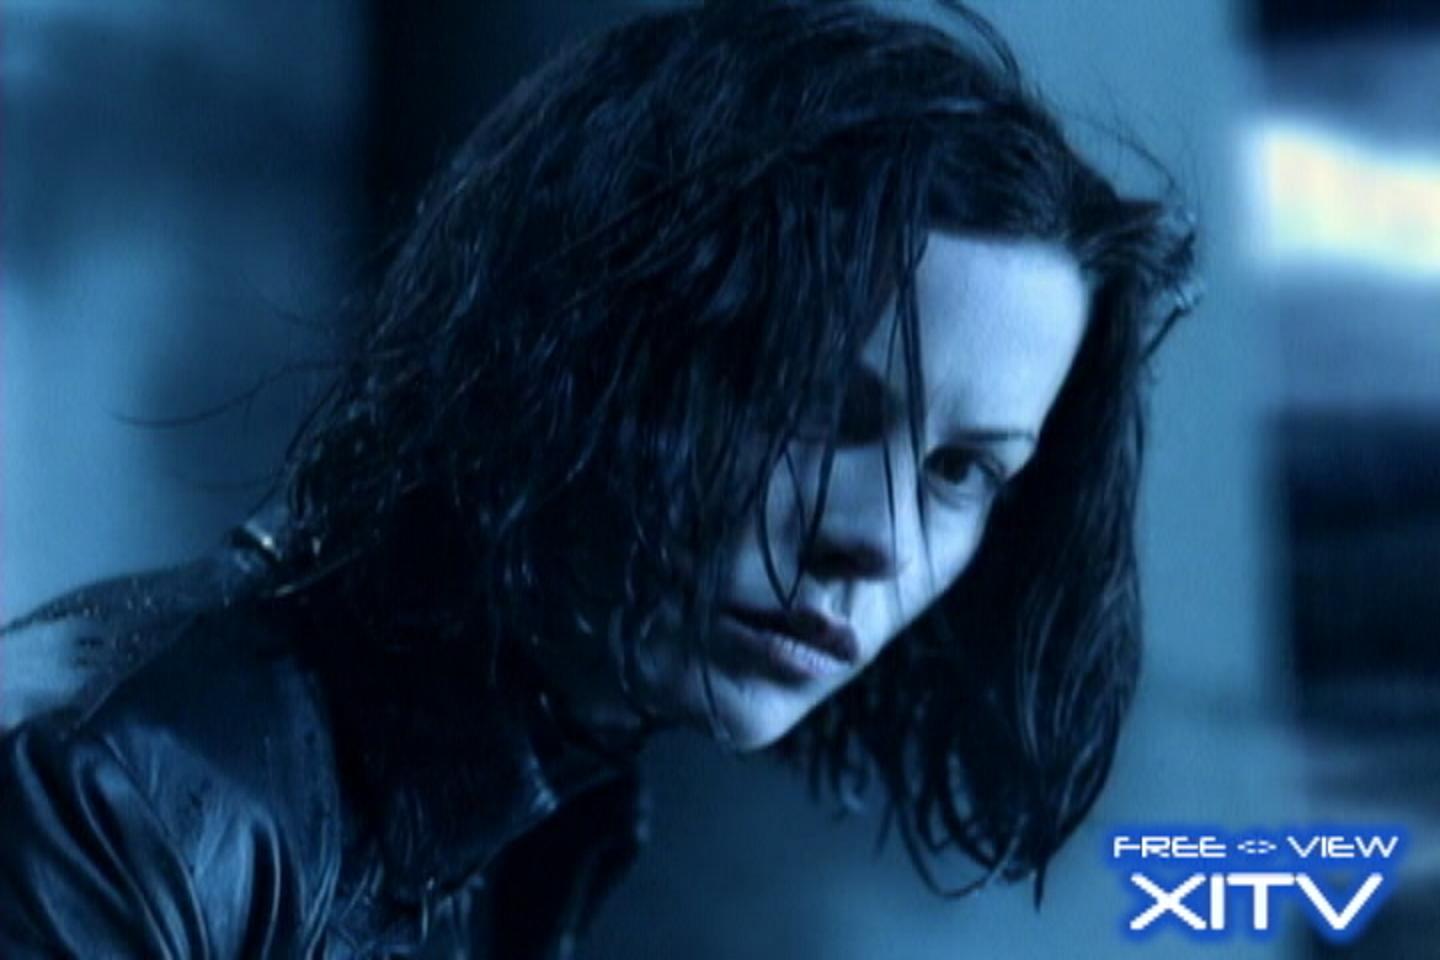 Watch Now! XITV FREE <> VIEW  Underworld! Starring Kate Beckinsale! XITV Is Must See TV! 